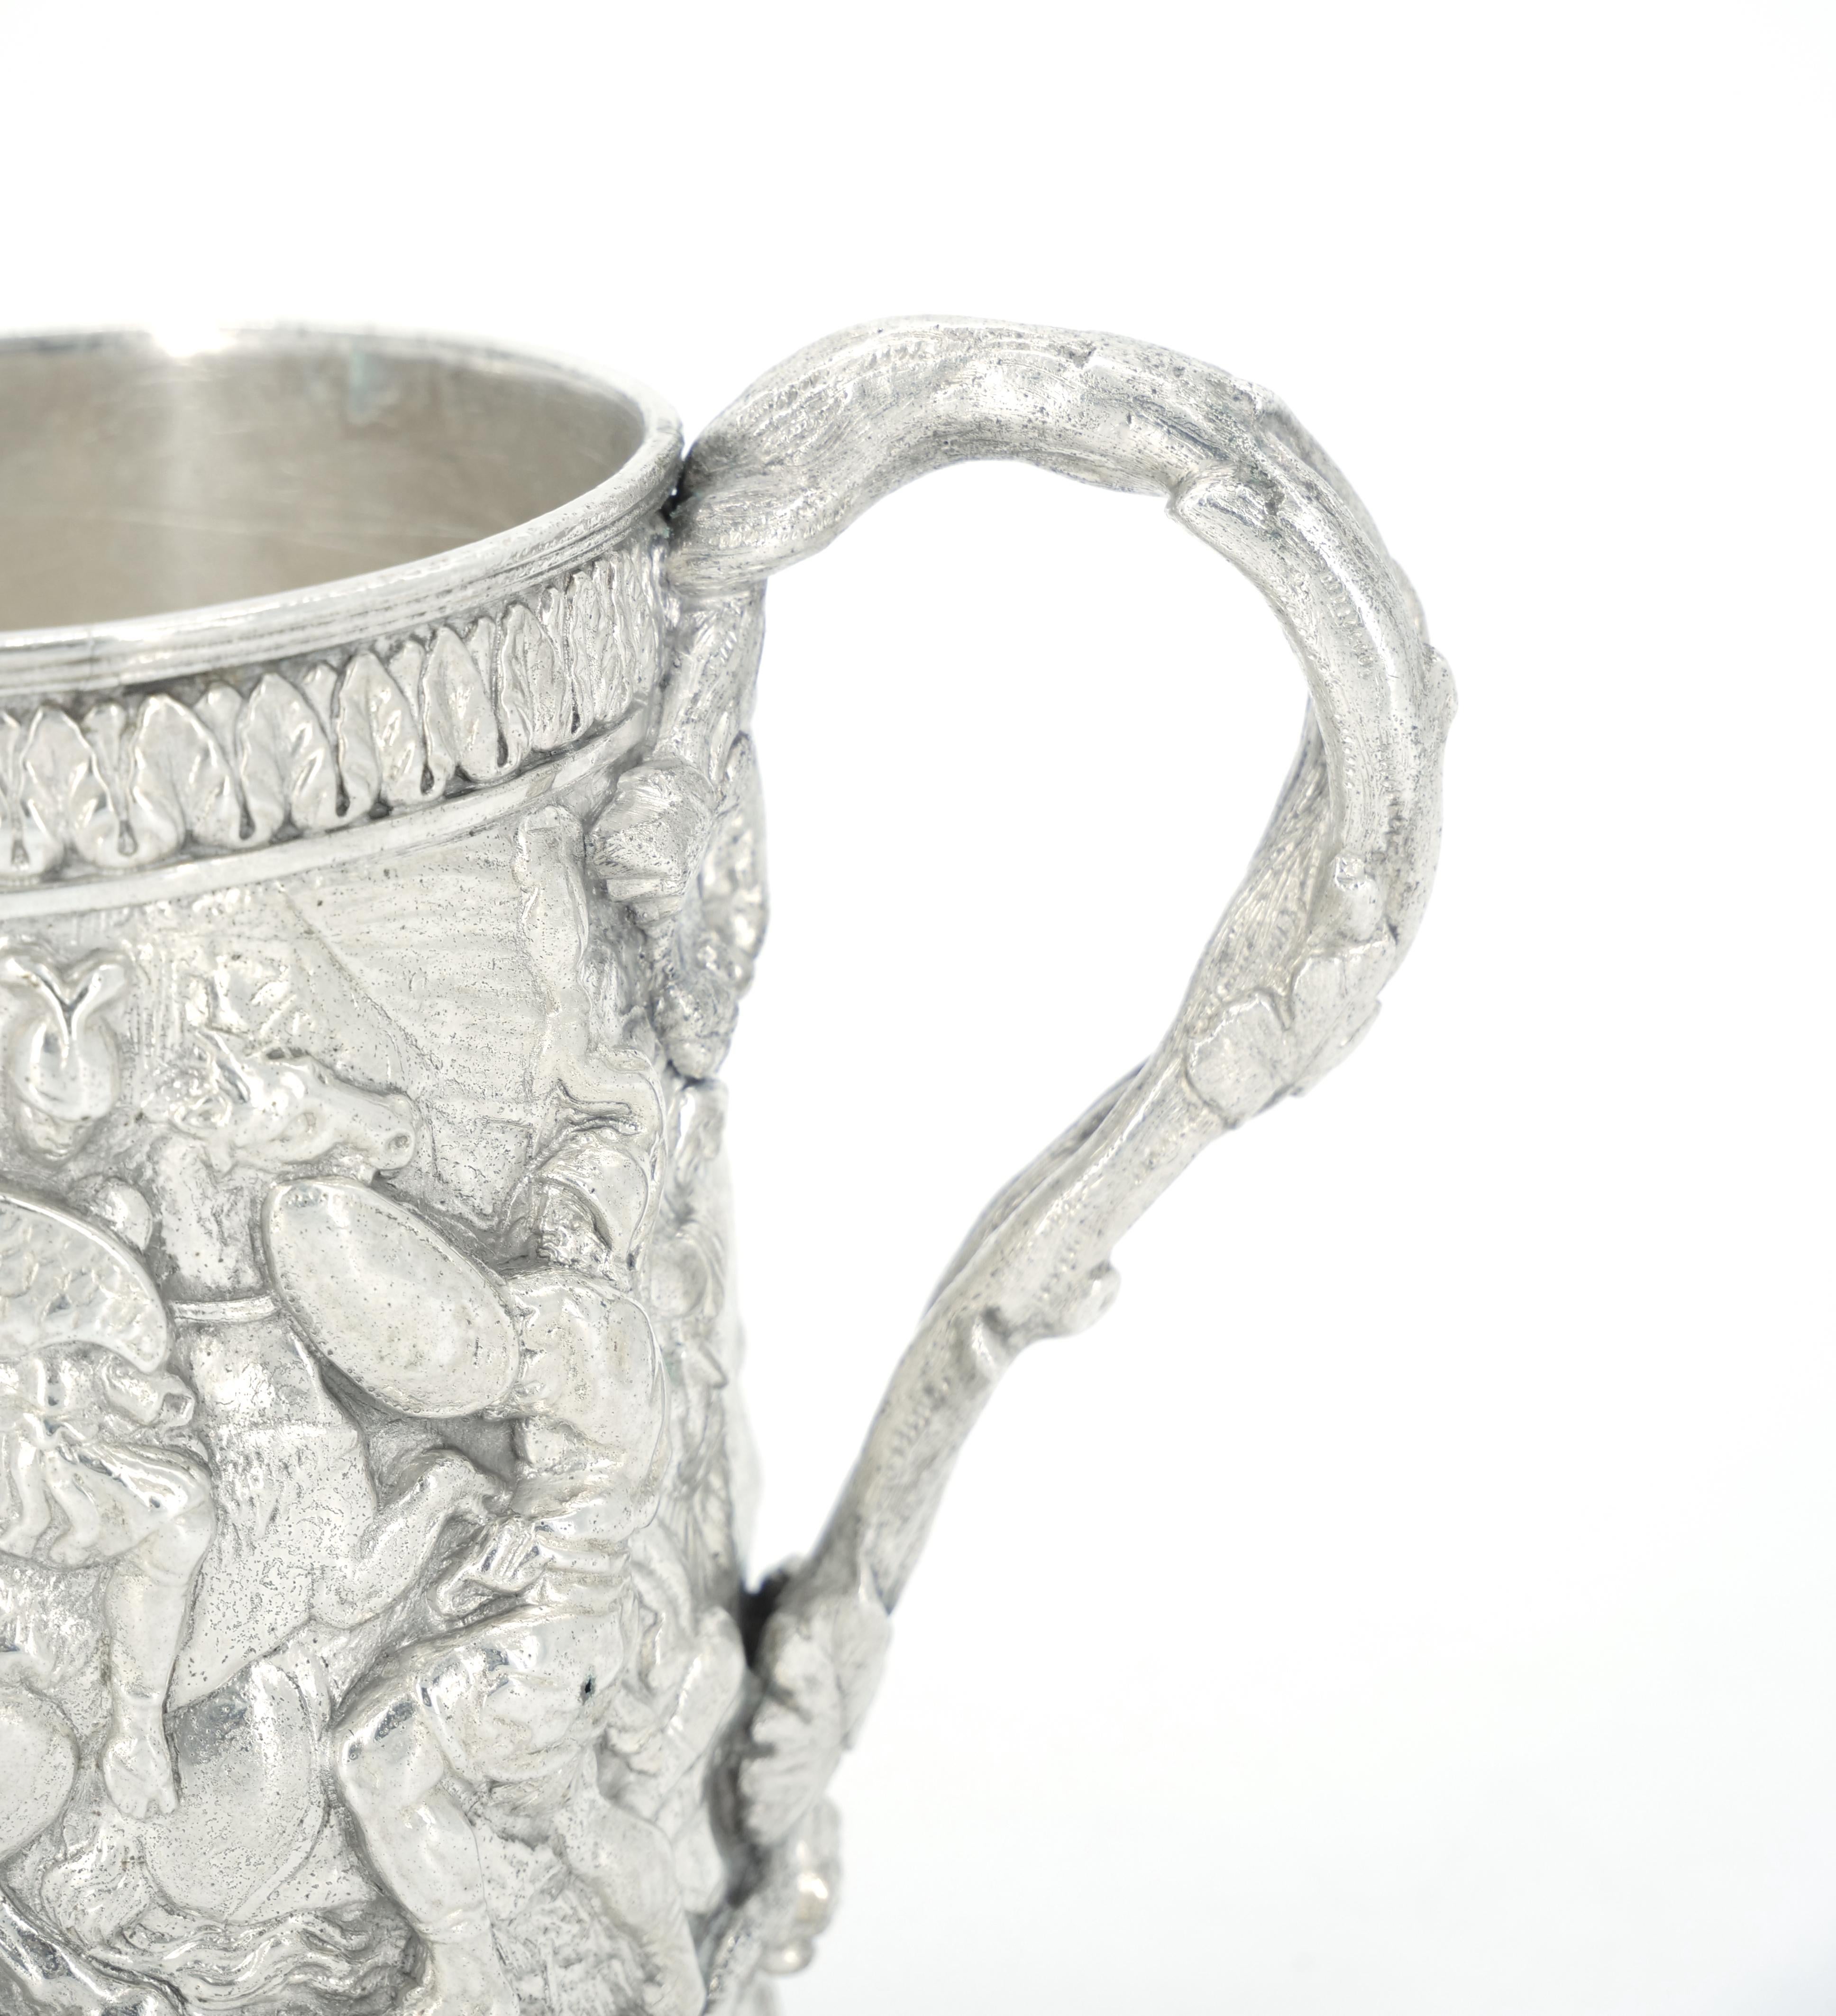 Victorian 19th Century English Silverplate Barware Mug Depicting Knights in Battle For Sale